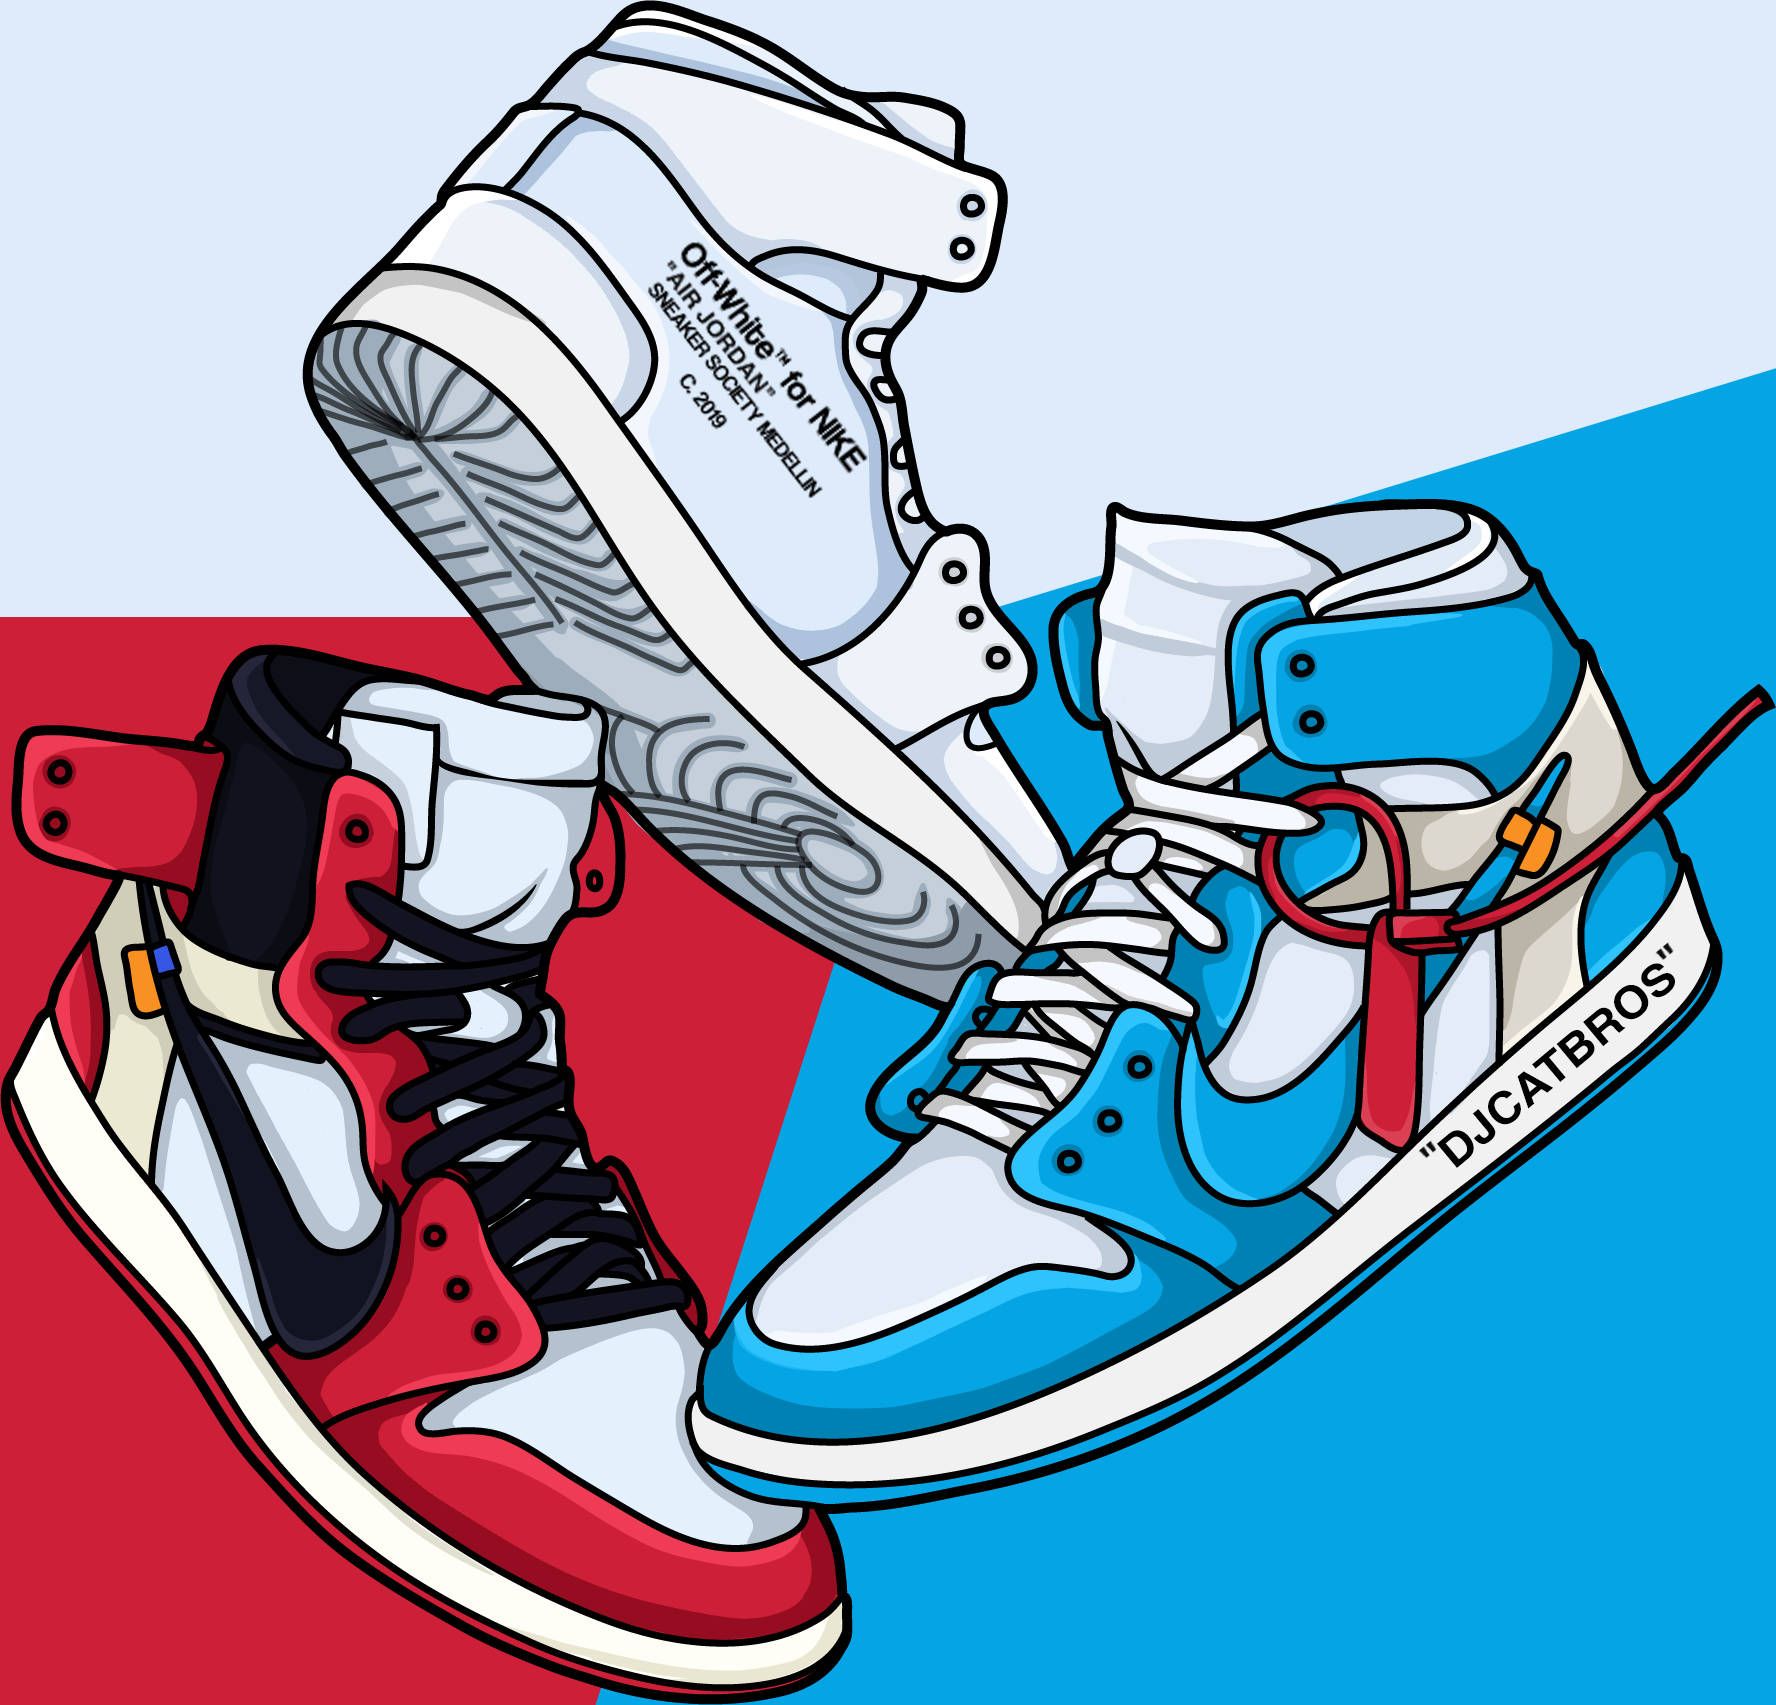 An illustration of two sneakers, one red and one blue, on a red, white, and blue background. - Shoes